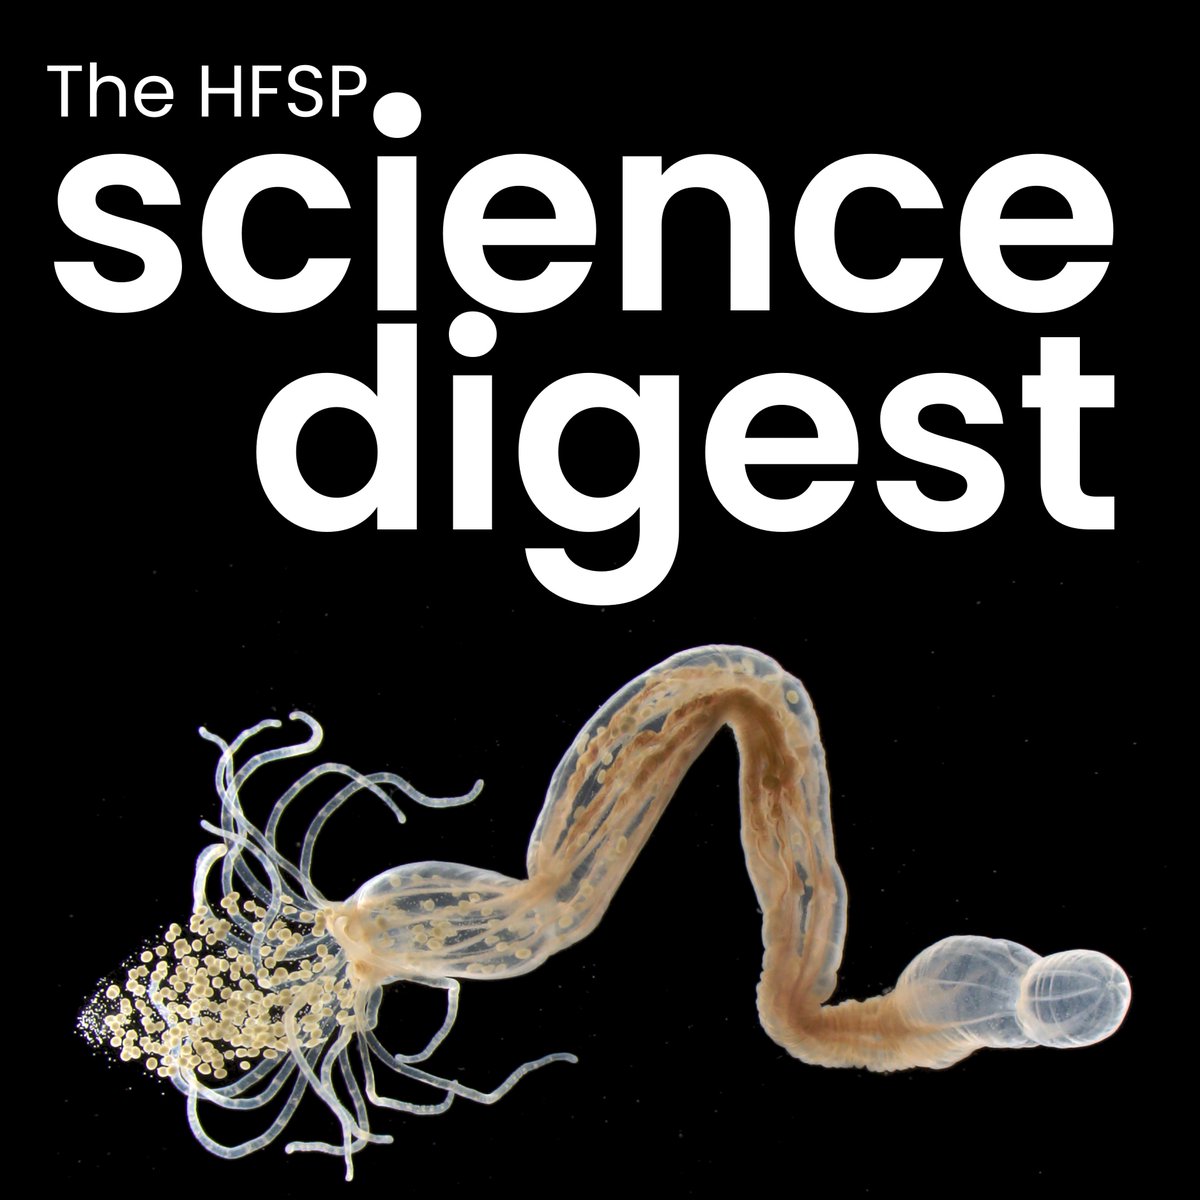 Attention scientists from all over the world 🙃The HFSP Science Digest is OUT TODAY! 🌐Dive into groundbreaking discoveries, explore extreme ecosystems, and catch up on the 2022 HFSP Awards!  Read it here:  bit.ly/3NyFxB2 
#HFSPScienceDigest #BasicLifeSciences